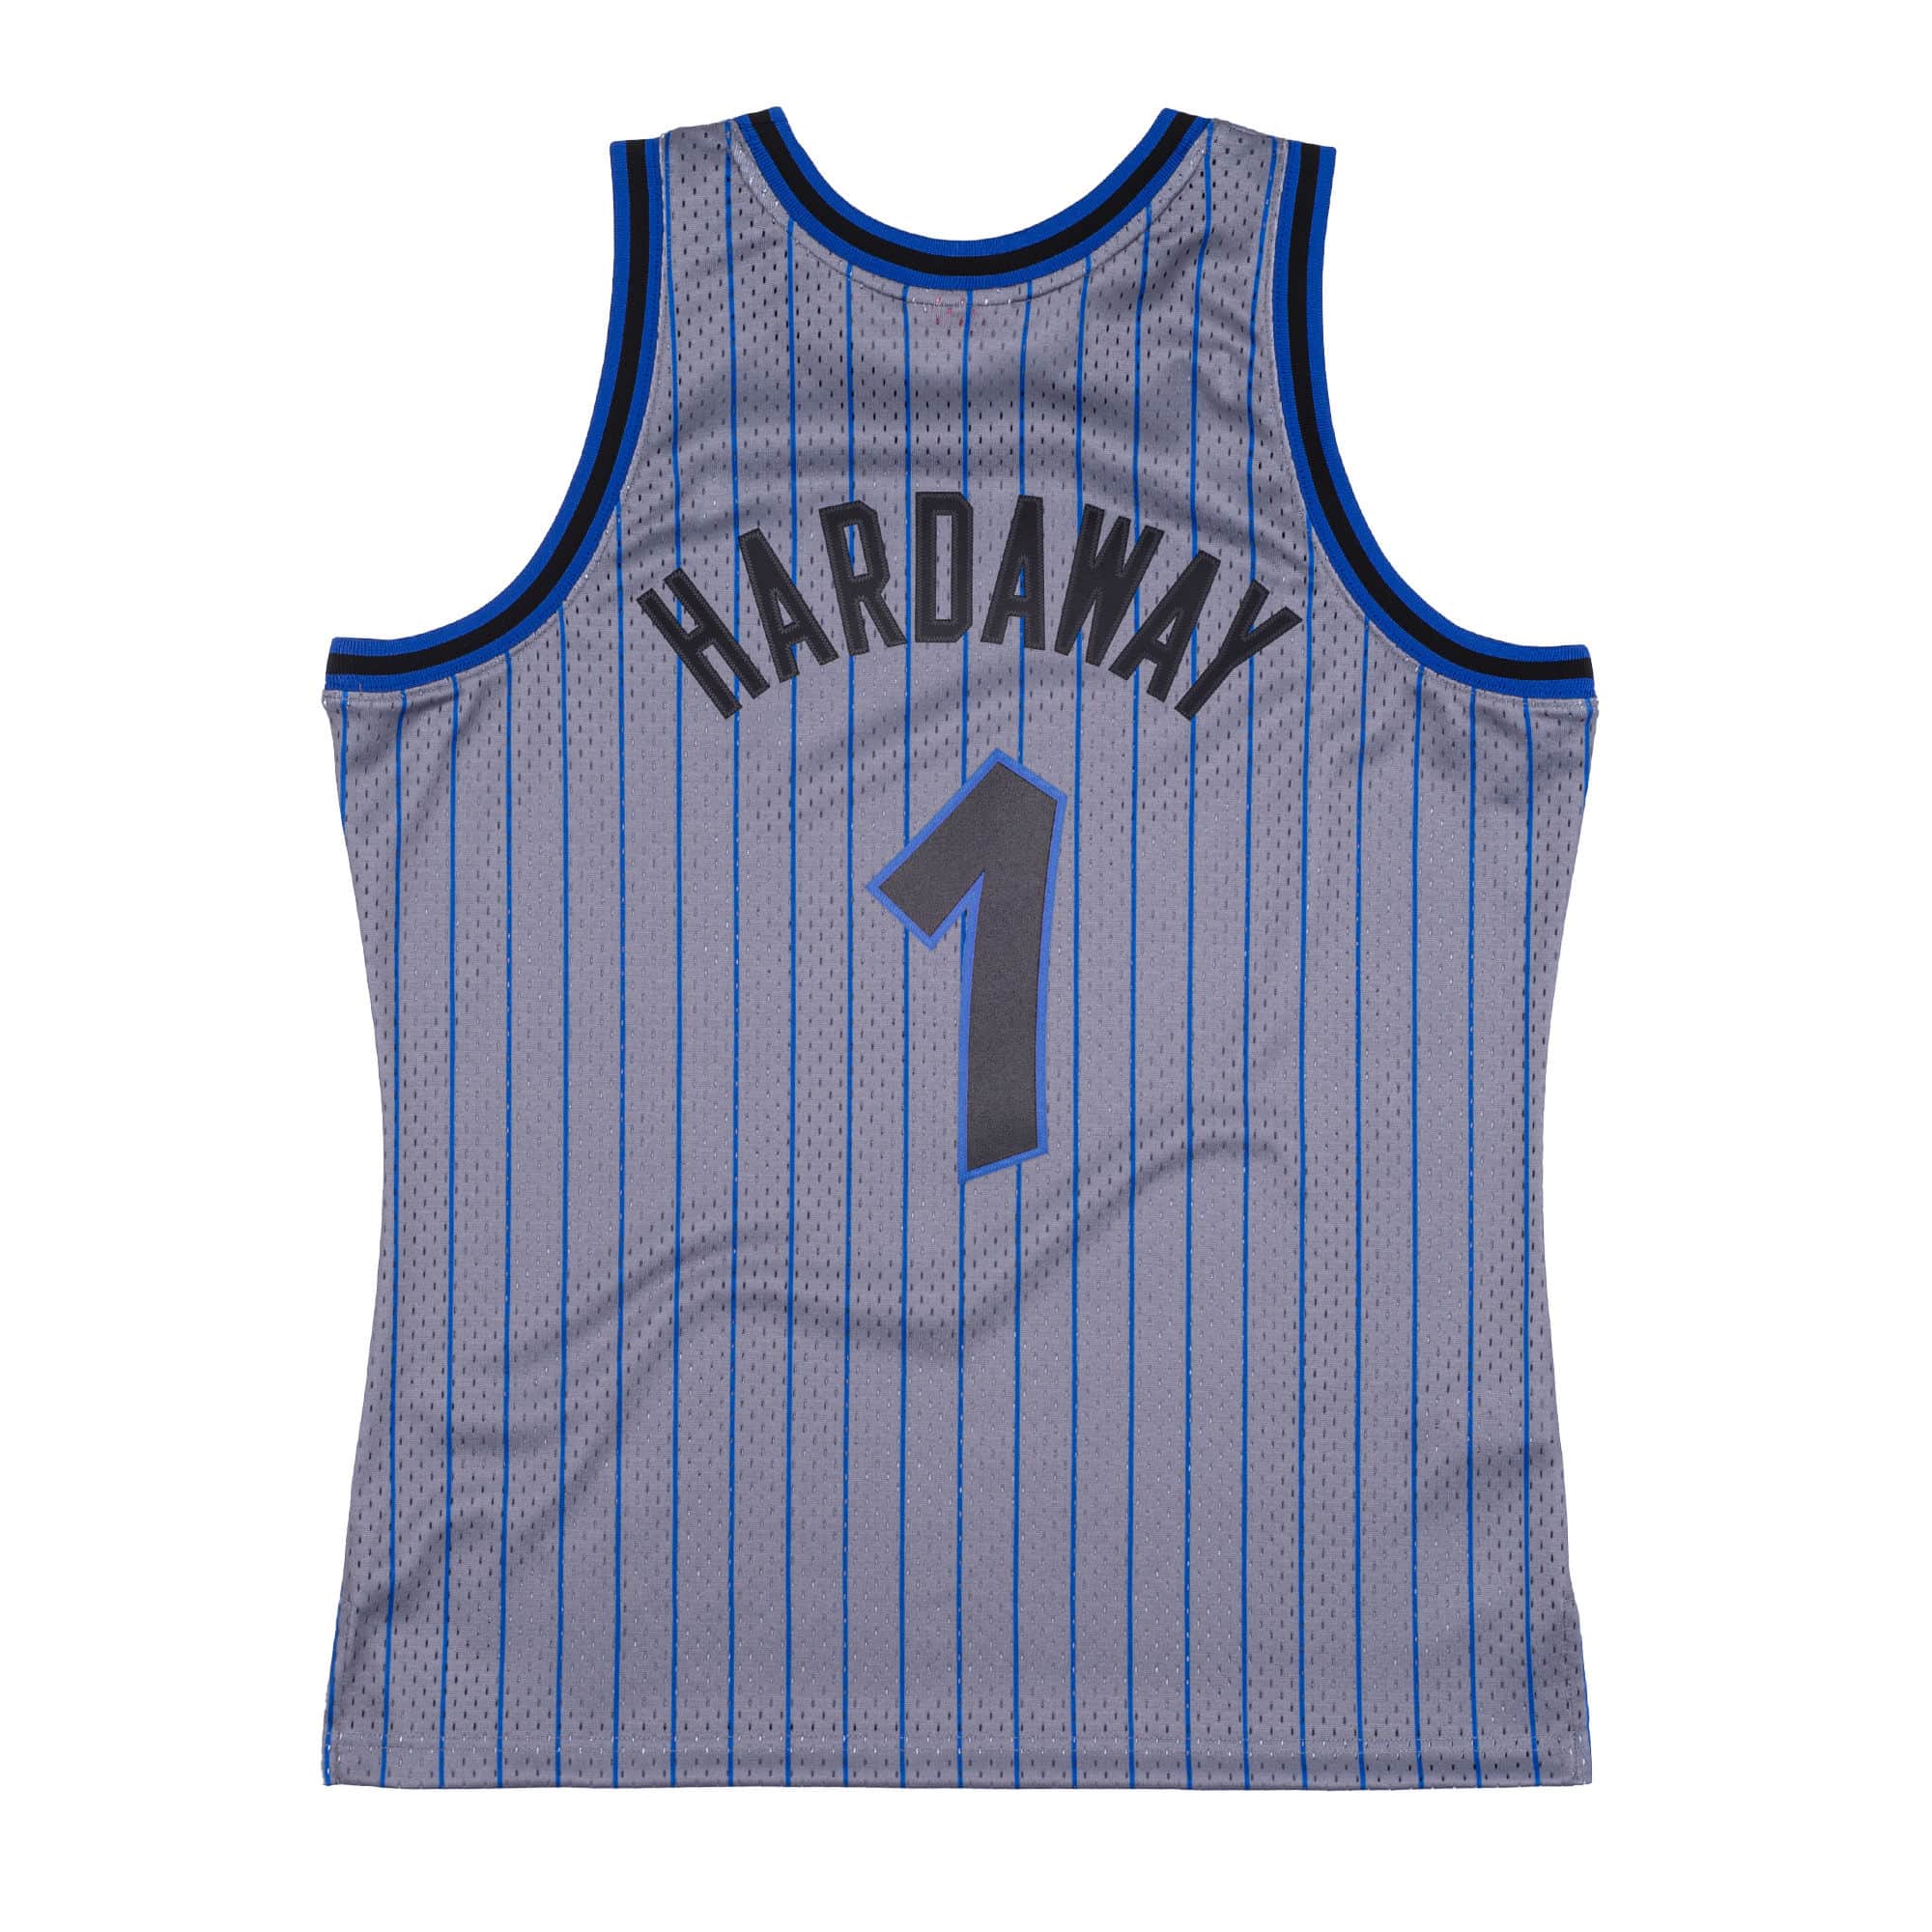 Penny Hardaway Orlando Magic Autographed Mitchell & Ness 1994 Replica Jersey  with a 4x All-Star